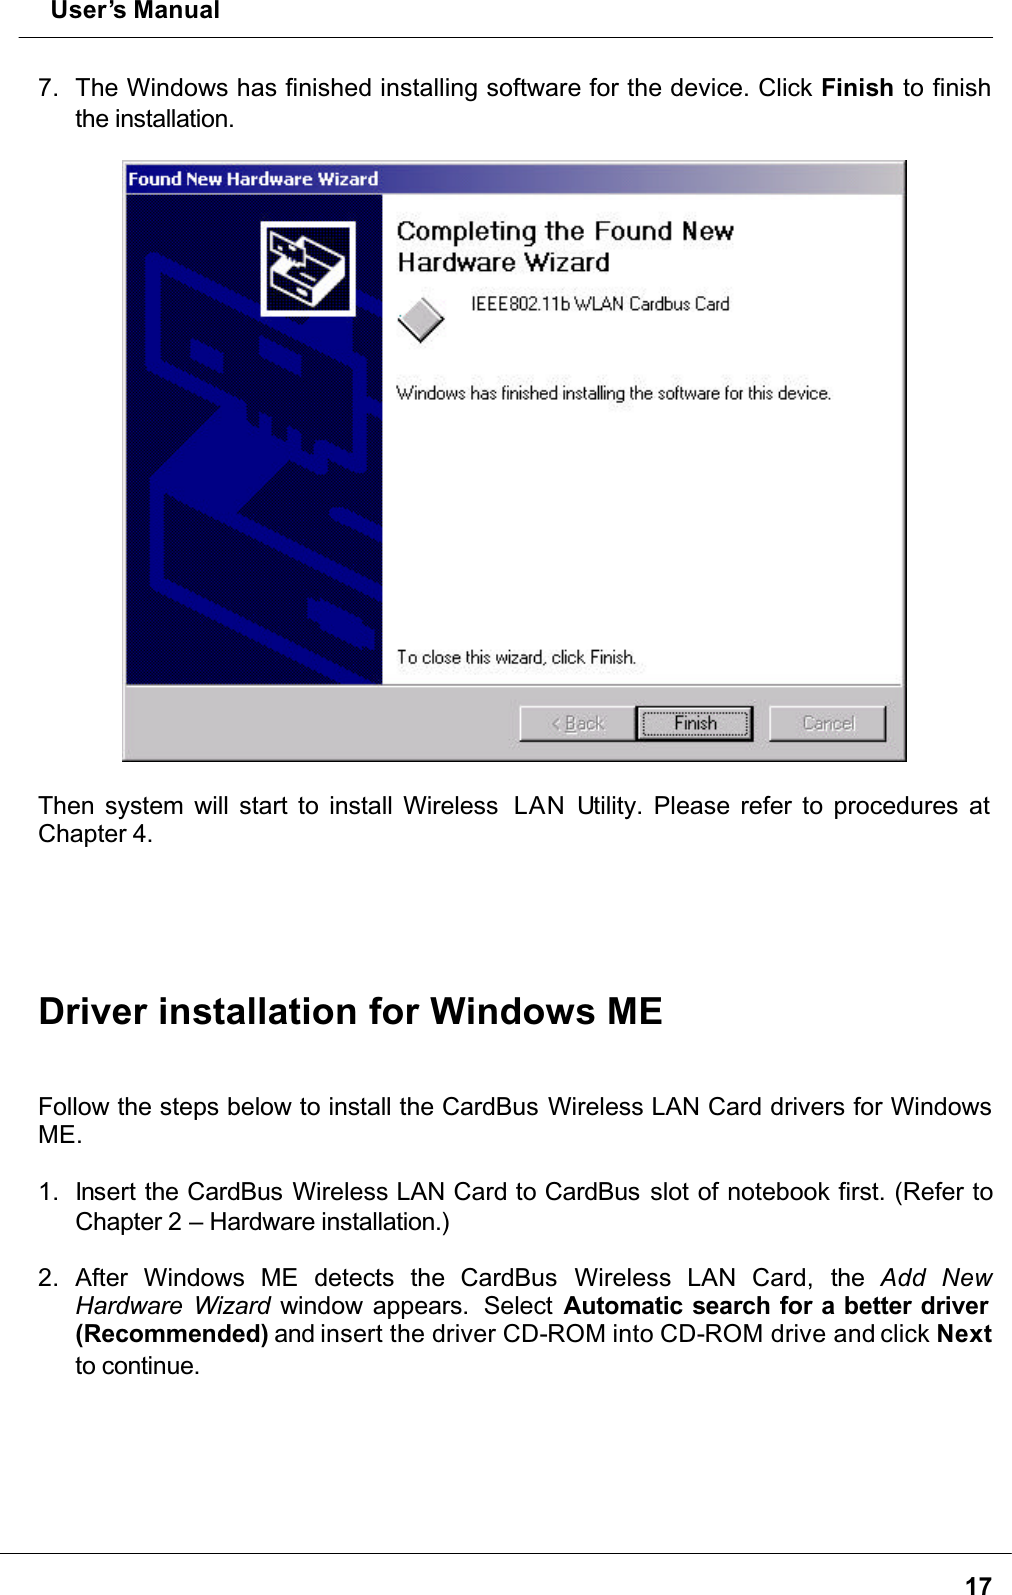  User’s Manual177. The Windows has finished installing software for the device. Click Finish to finish the installation.Then system will start to install Wireless  LAN Utility. Please refer to procedures at Chapter 4.Driver installation for Windows MEFollow the steps below to install the CardBus Wireless LAN Card drivers for Windows ME.1. Insert the CardBus Wireless LAN Card to CardBus slot of notebook first. (Refer to Chapter 2 – Hardware installation.)2. After Windows ME detects the CardBus  Wireless LAN Card, the Add NewHardware Wizard window appears.  Select Automatic search for a better driver (Recommended) and insert the driver CD-ROM into CD-ROM drive and click Nextto continue.